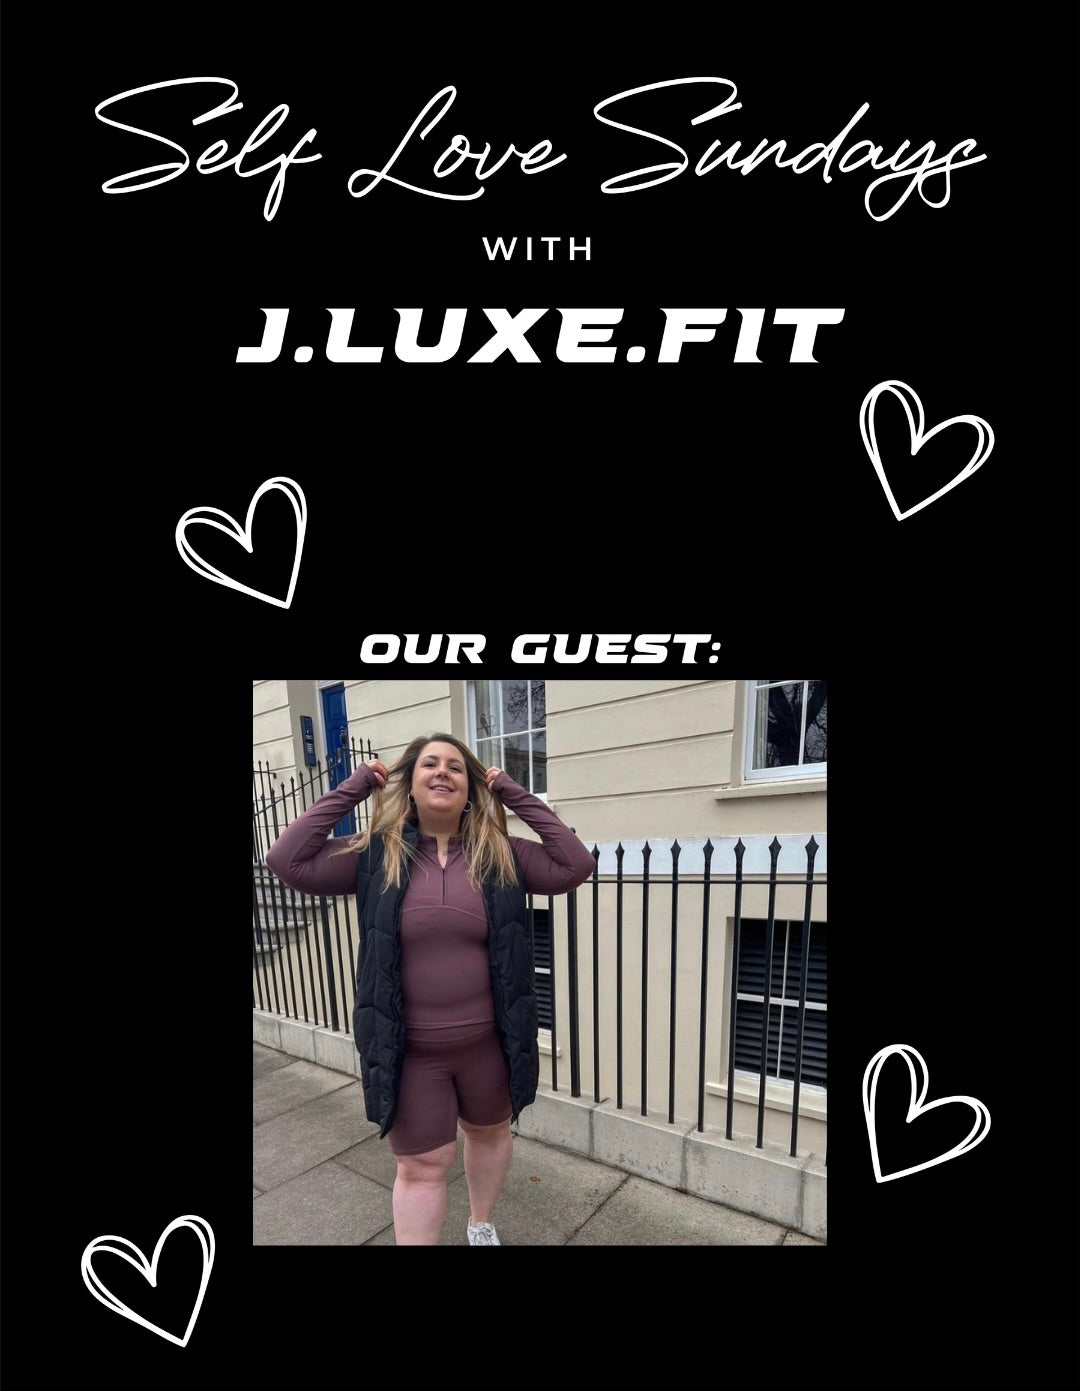 J.LUXE.FIT